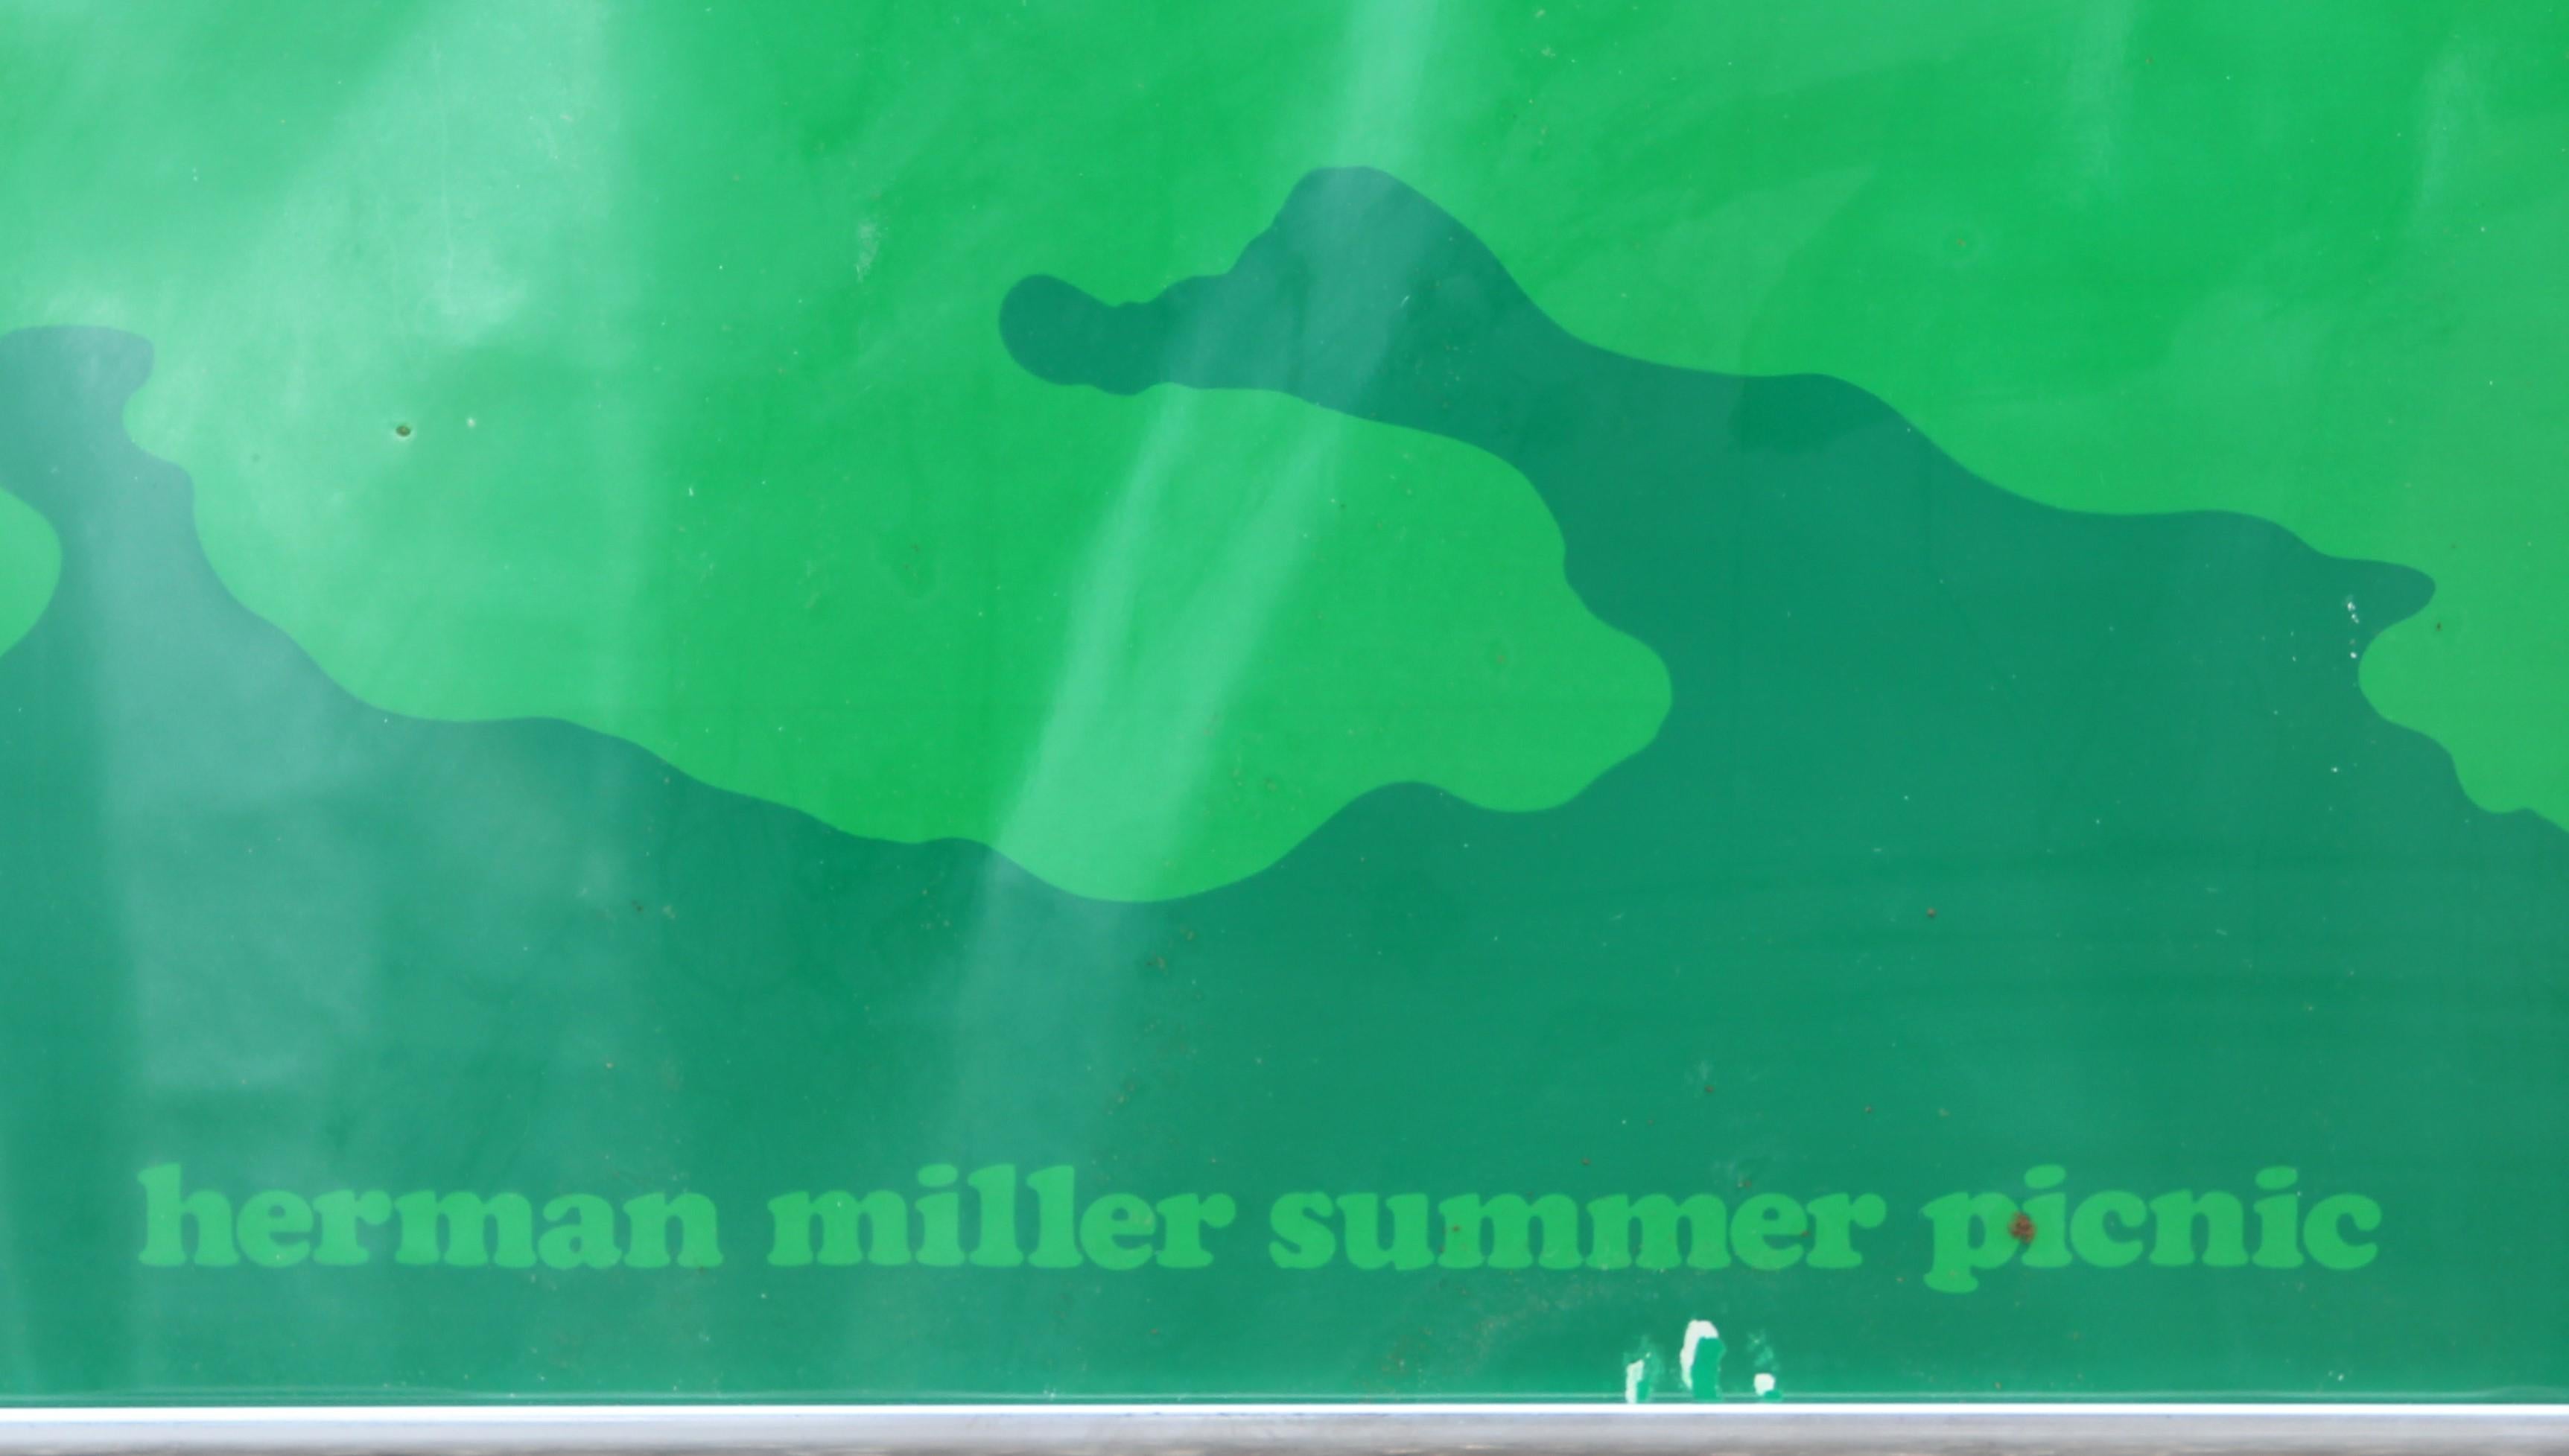 Original Herman Miller Summer Picnic screen printed lacquer ink and lacquer finish print. August 5, 1977 annual company picnic poster is a close up graphic vector of a fruit salad in vibrant greens, yellows, and indigos. Framed in silver metal